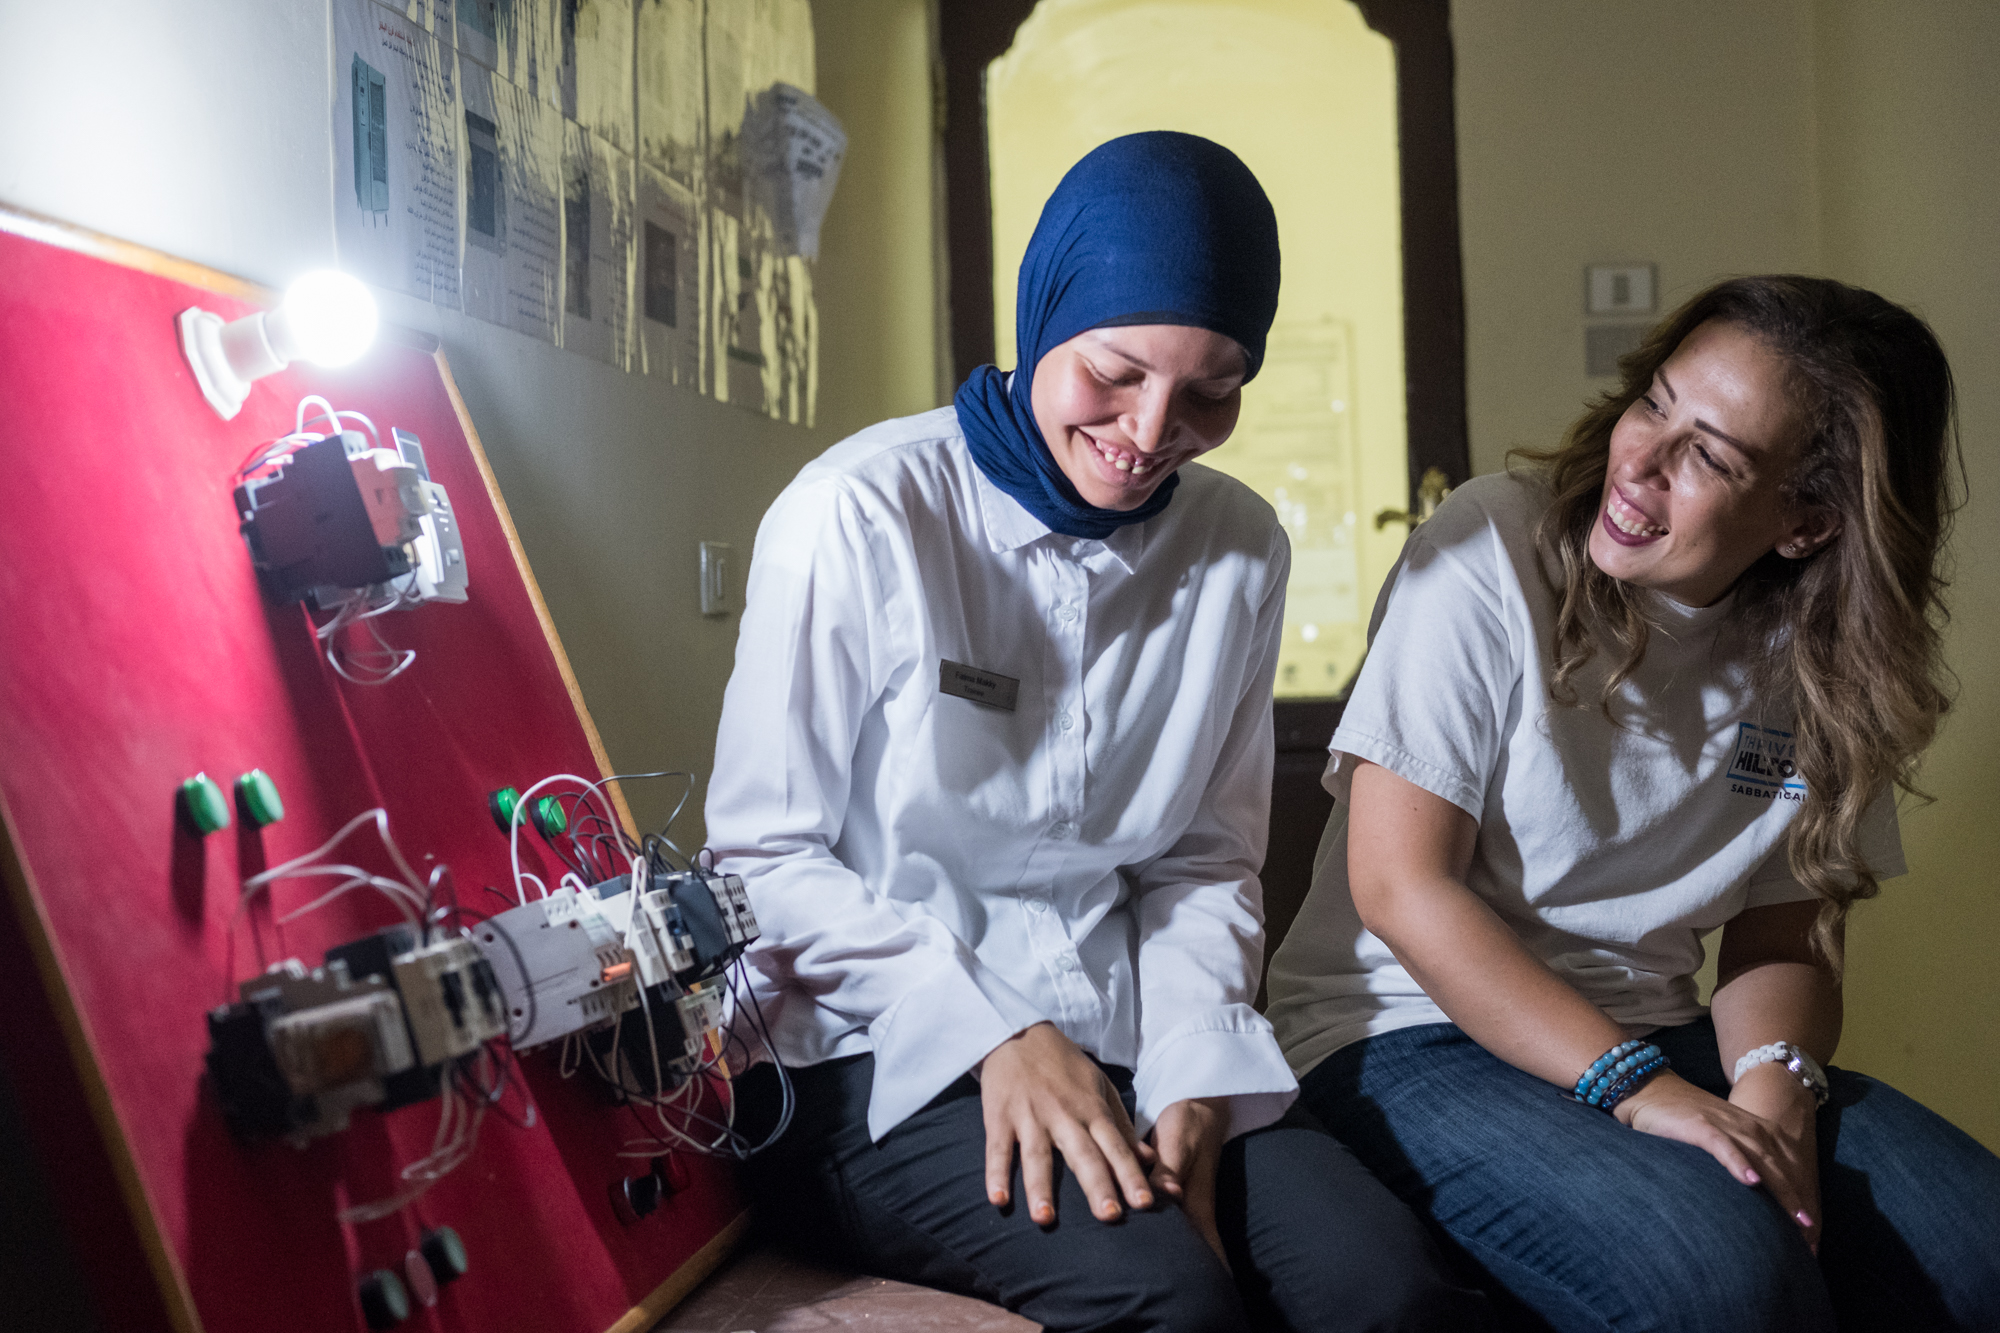  Ingy Helal (right) poses for a portrait with Fatma (left), a trainee in the Engineering/Electrical Department at Hilton Sharm Waterfalls Resort in Sharm El Sheikh, Egypt. Ingy’s training program brought young adults from Upper Egypt into the tourism